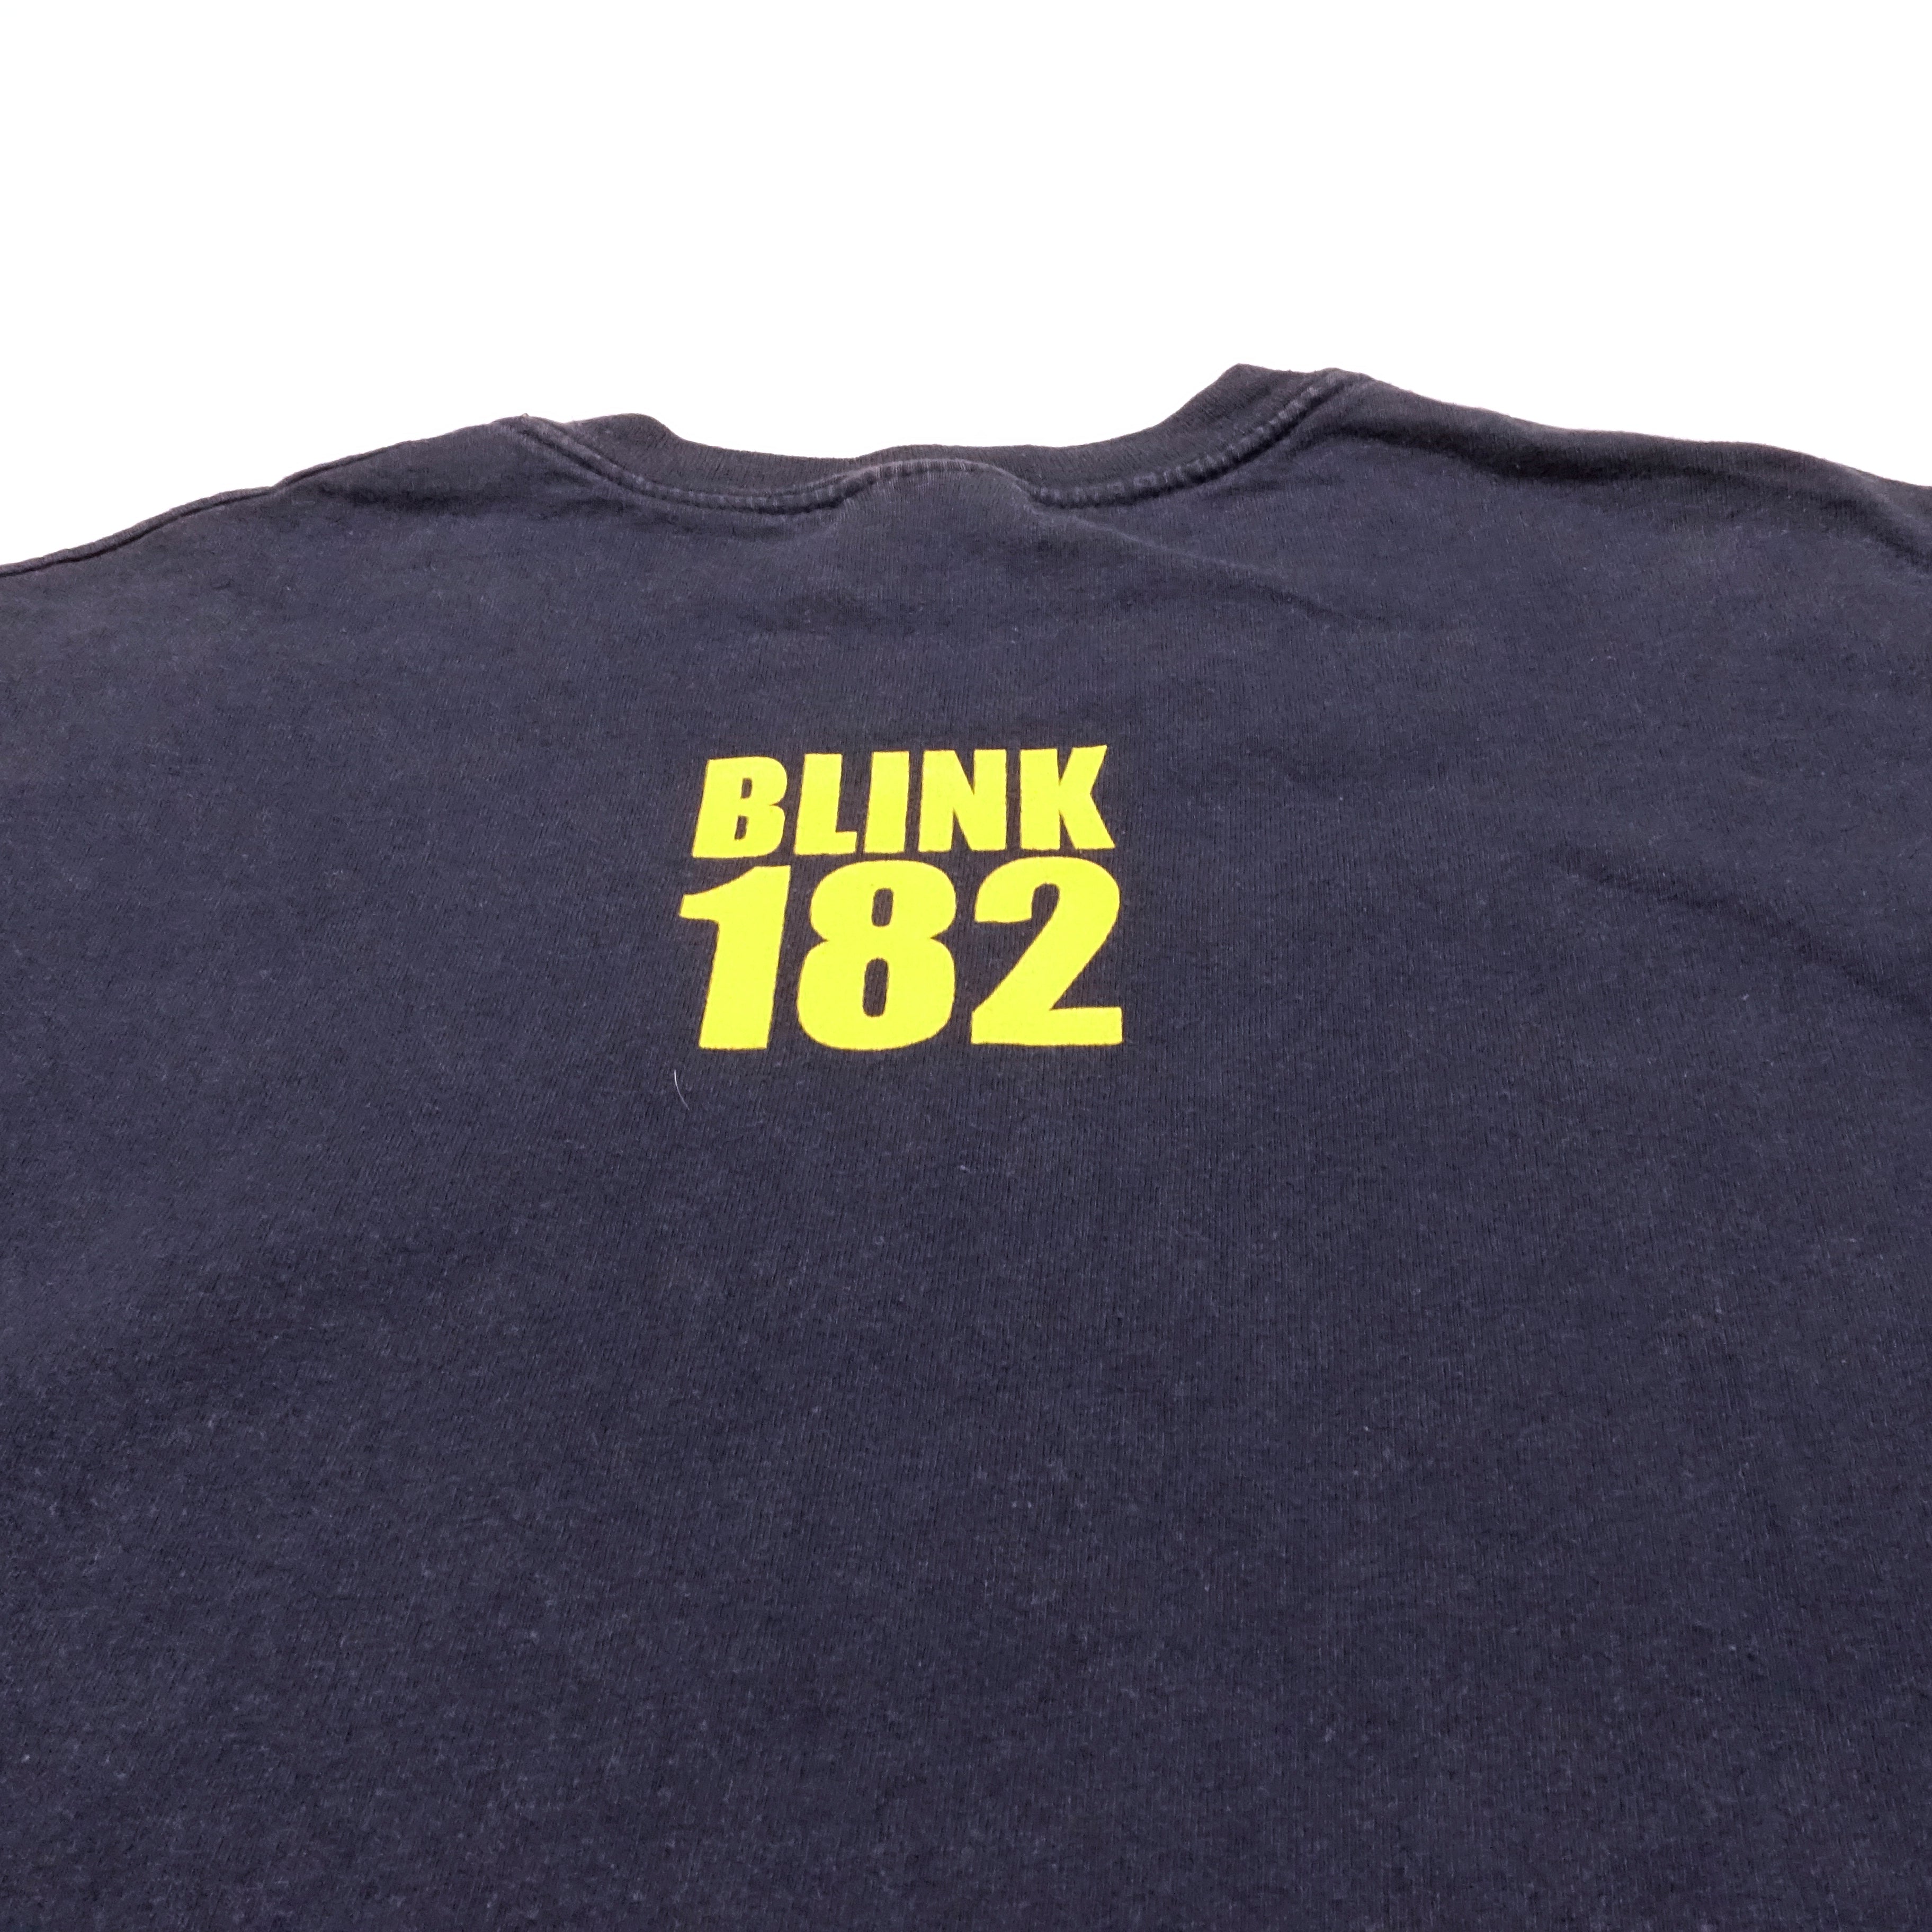 Blink-182 - Take Of Your Pants And Jacket 2001 Tour Shirt Size Large